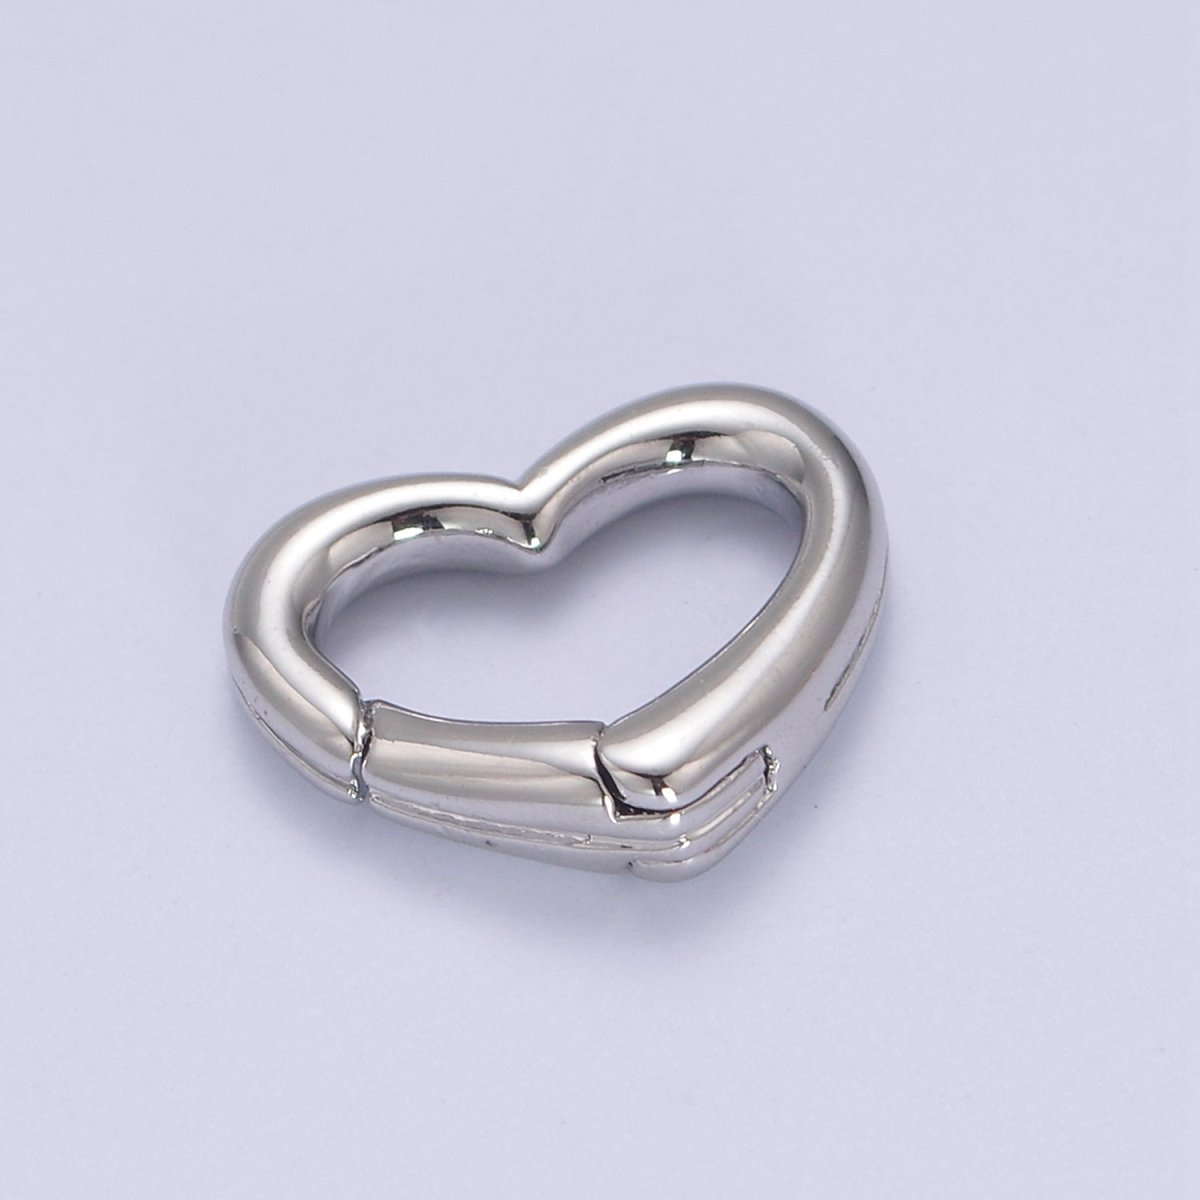 Gold Silver Spring Gate Ring Heart Clasp, Push Clip Clasp, Spring Gate for Jewelry Making L-660 L-661 - DLUXCA